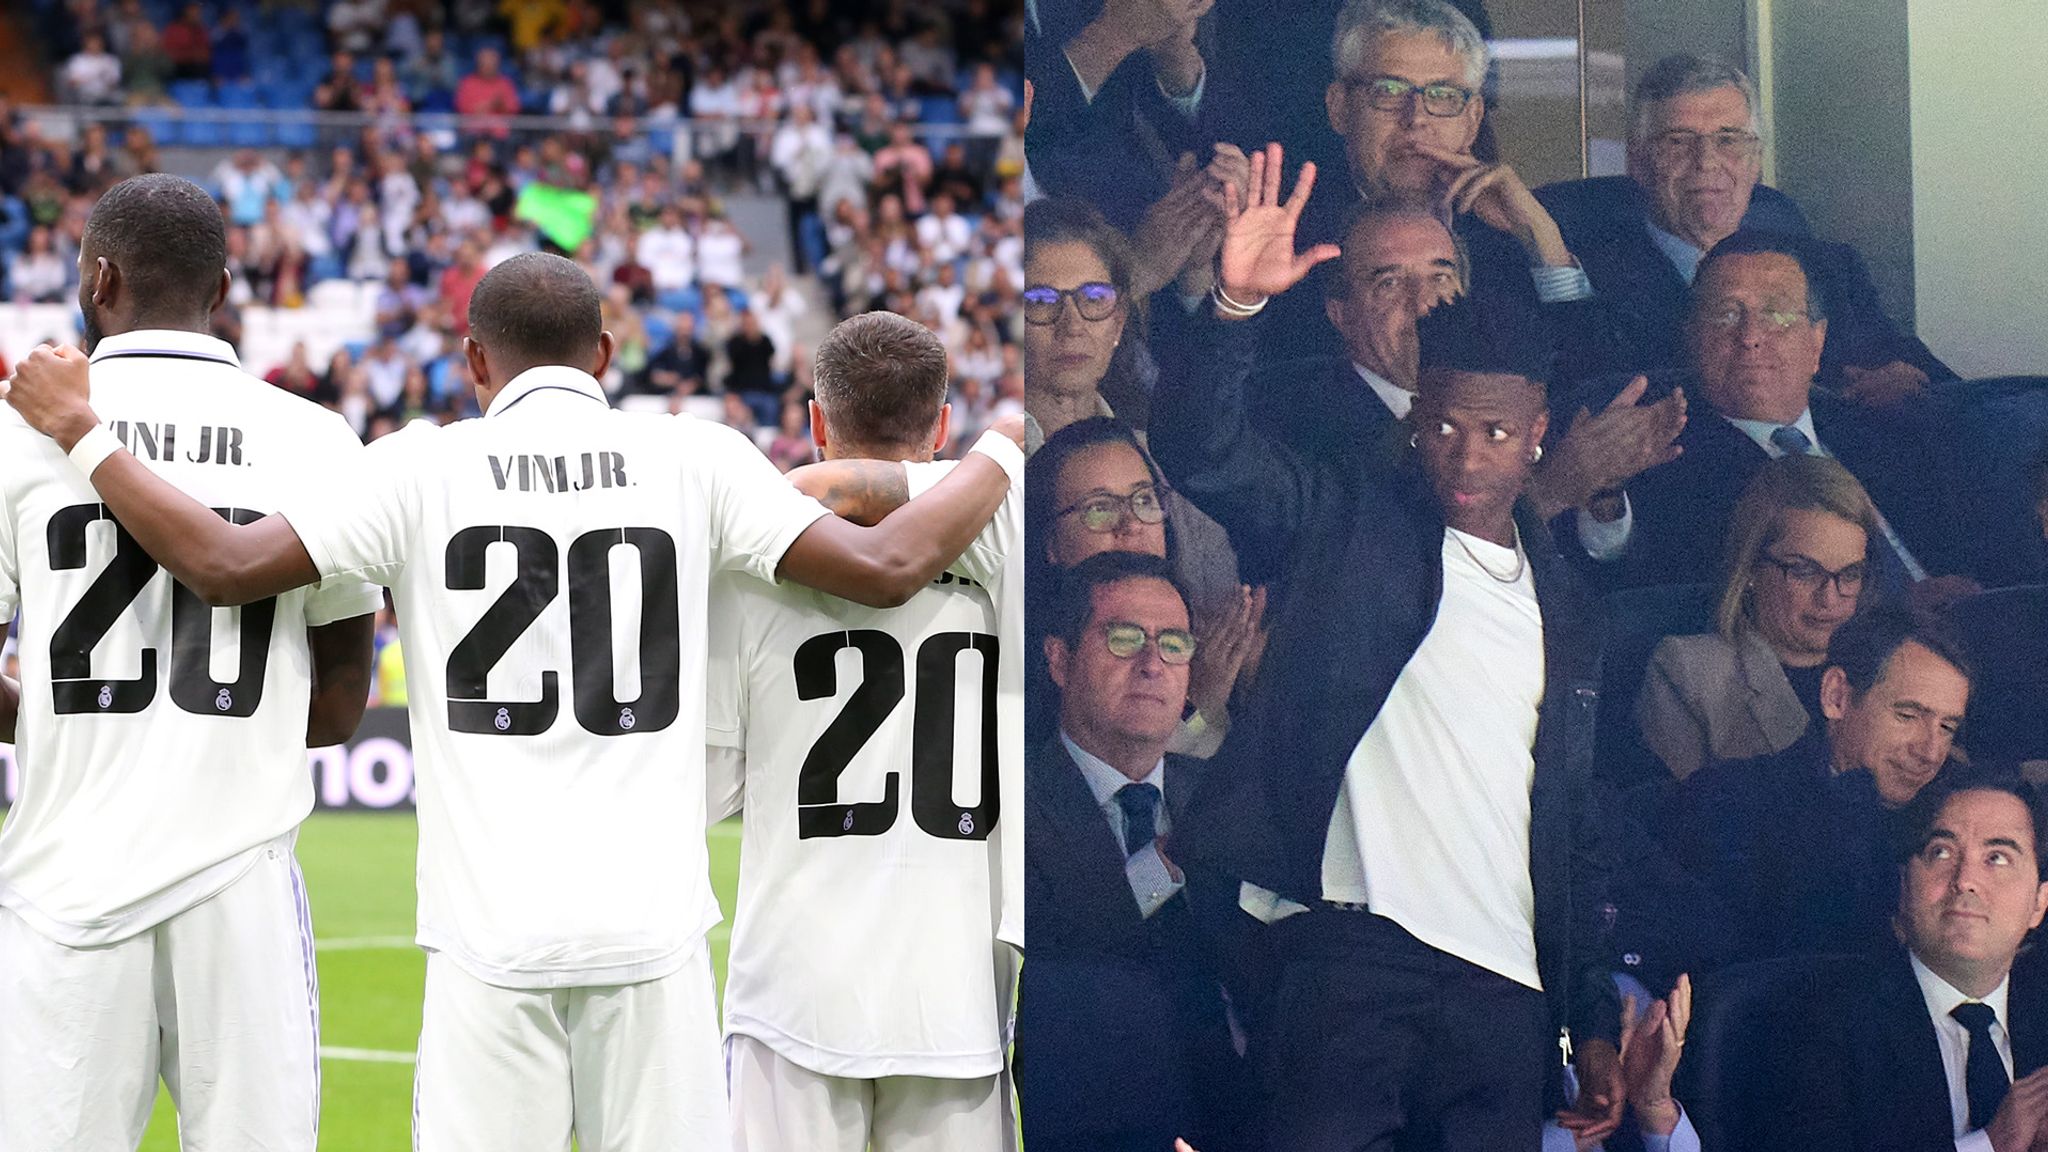 Real Madrid issue strong statement after Vinicius Jr. gets